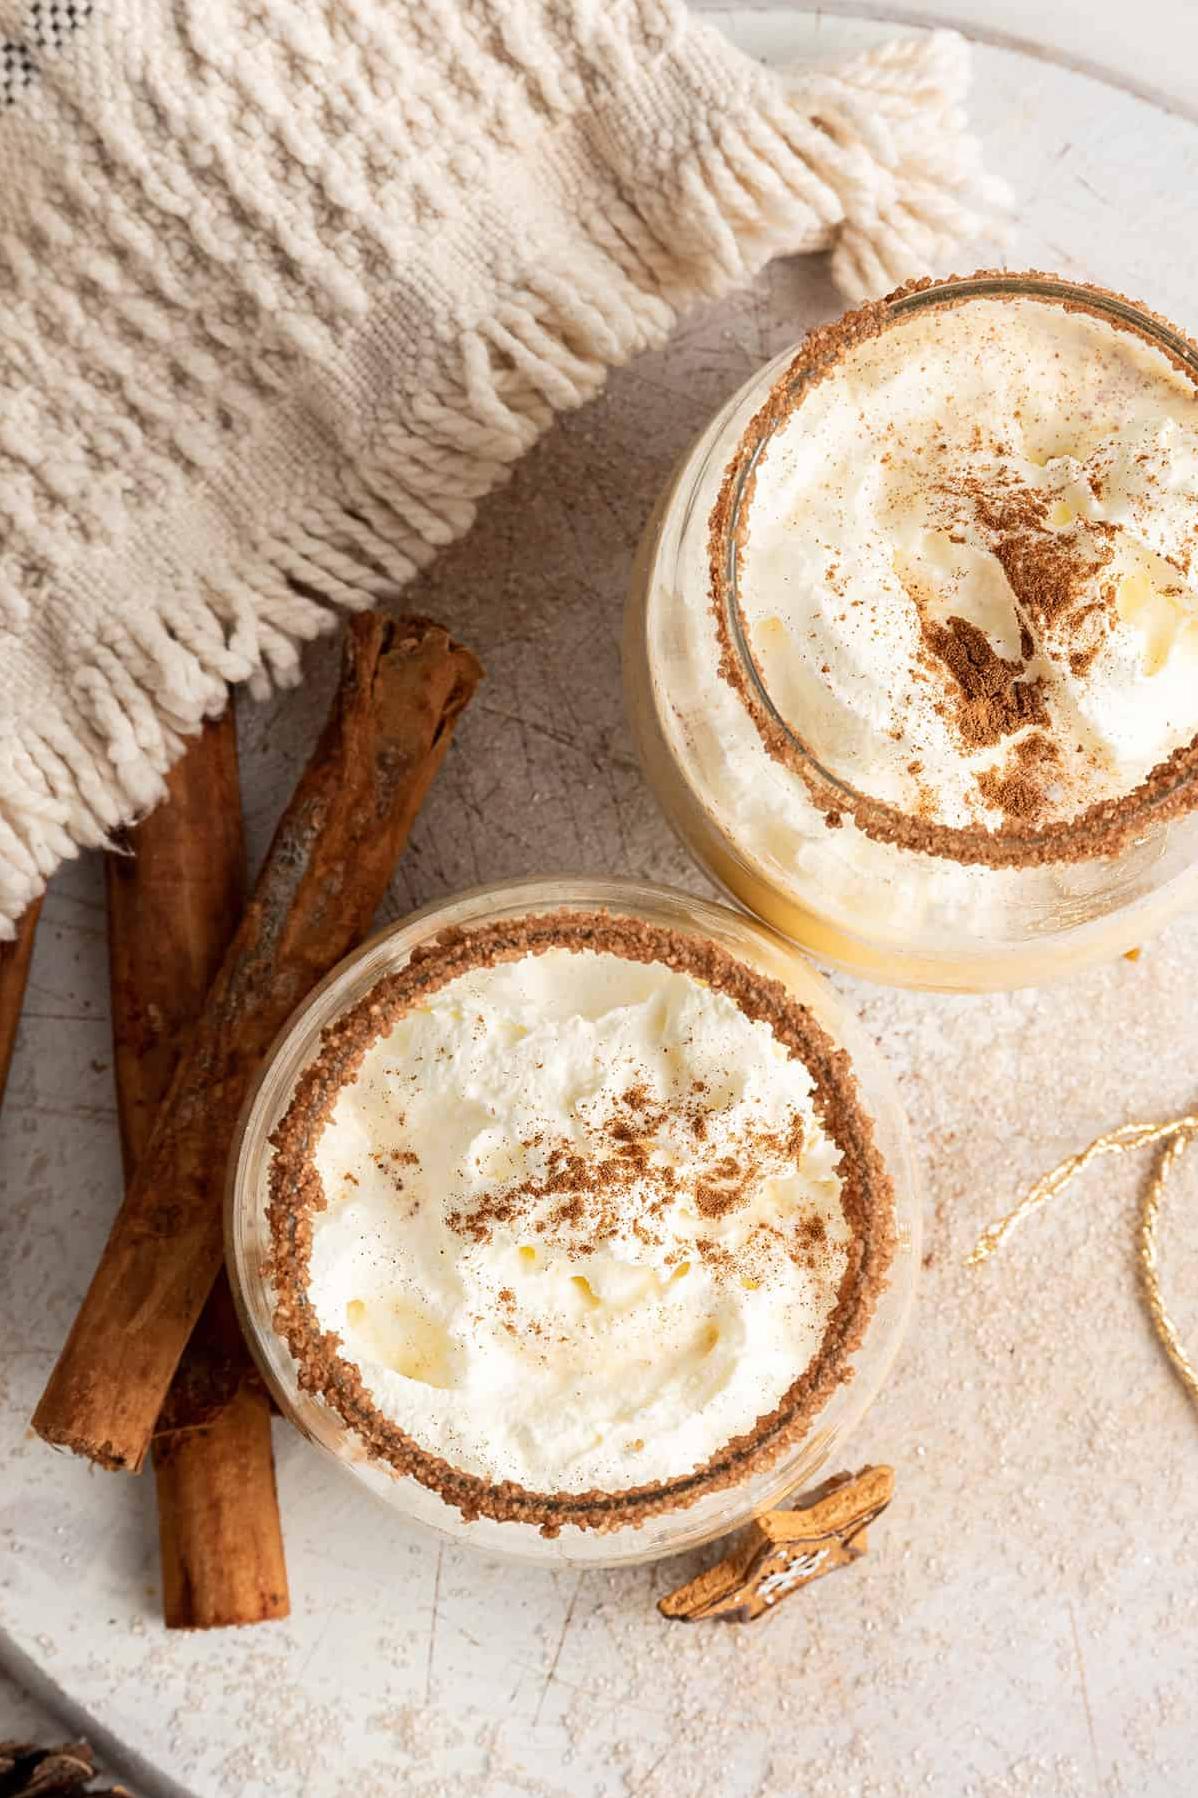  A sprinkle of cinnamon on top adds warmth and flavor to each sip.